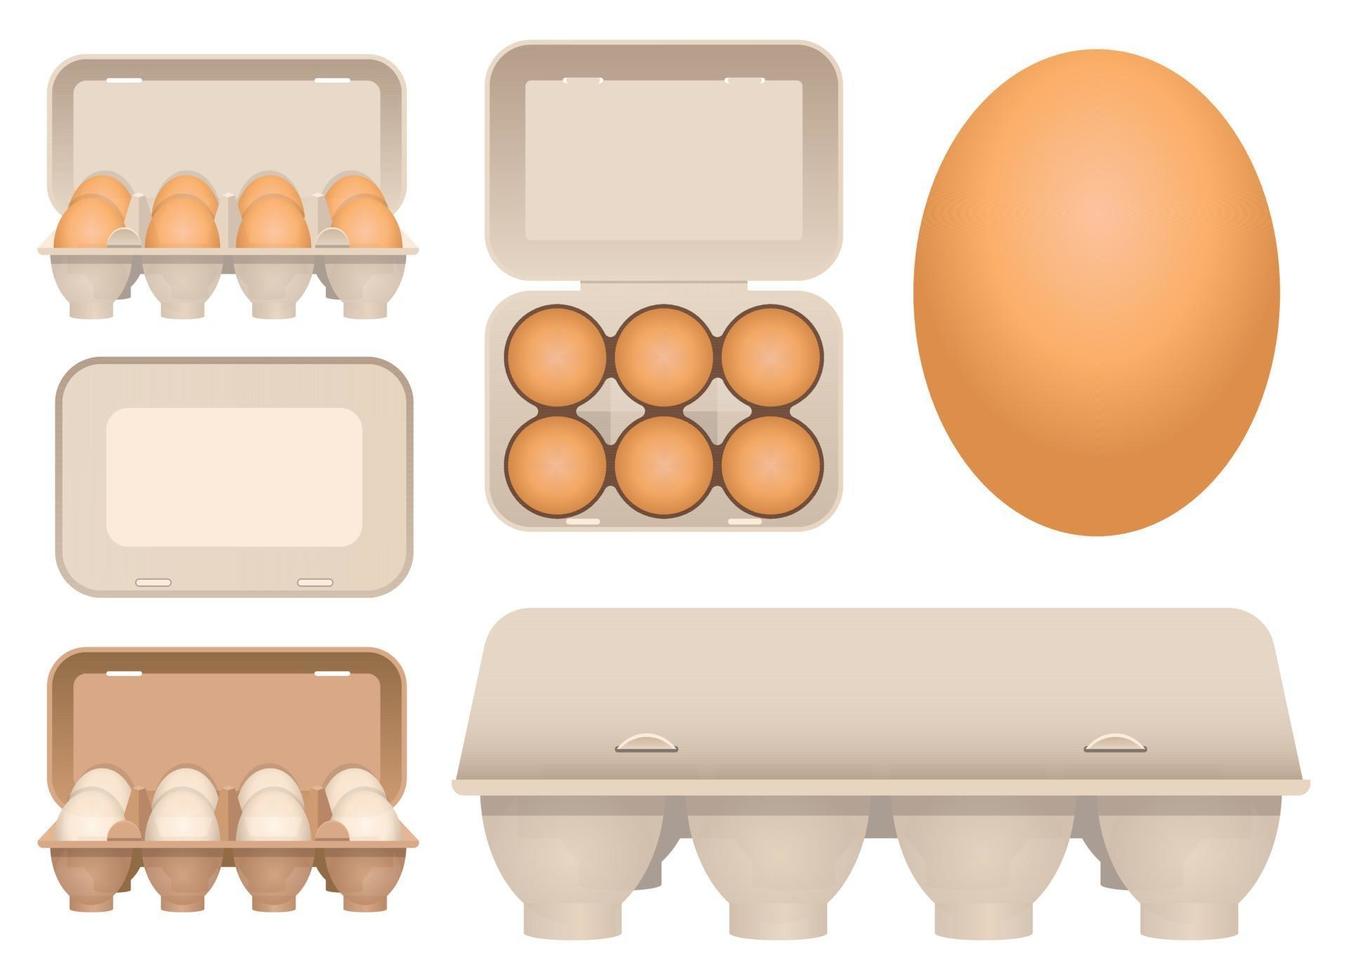 Chicken eggs in carton vector design illustration set isolated on white background